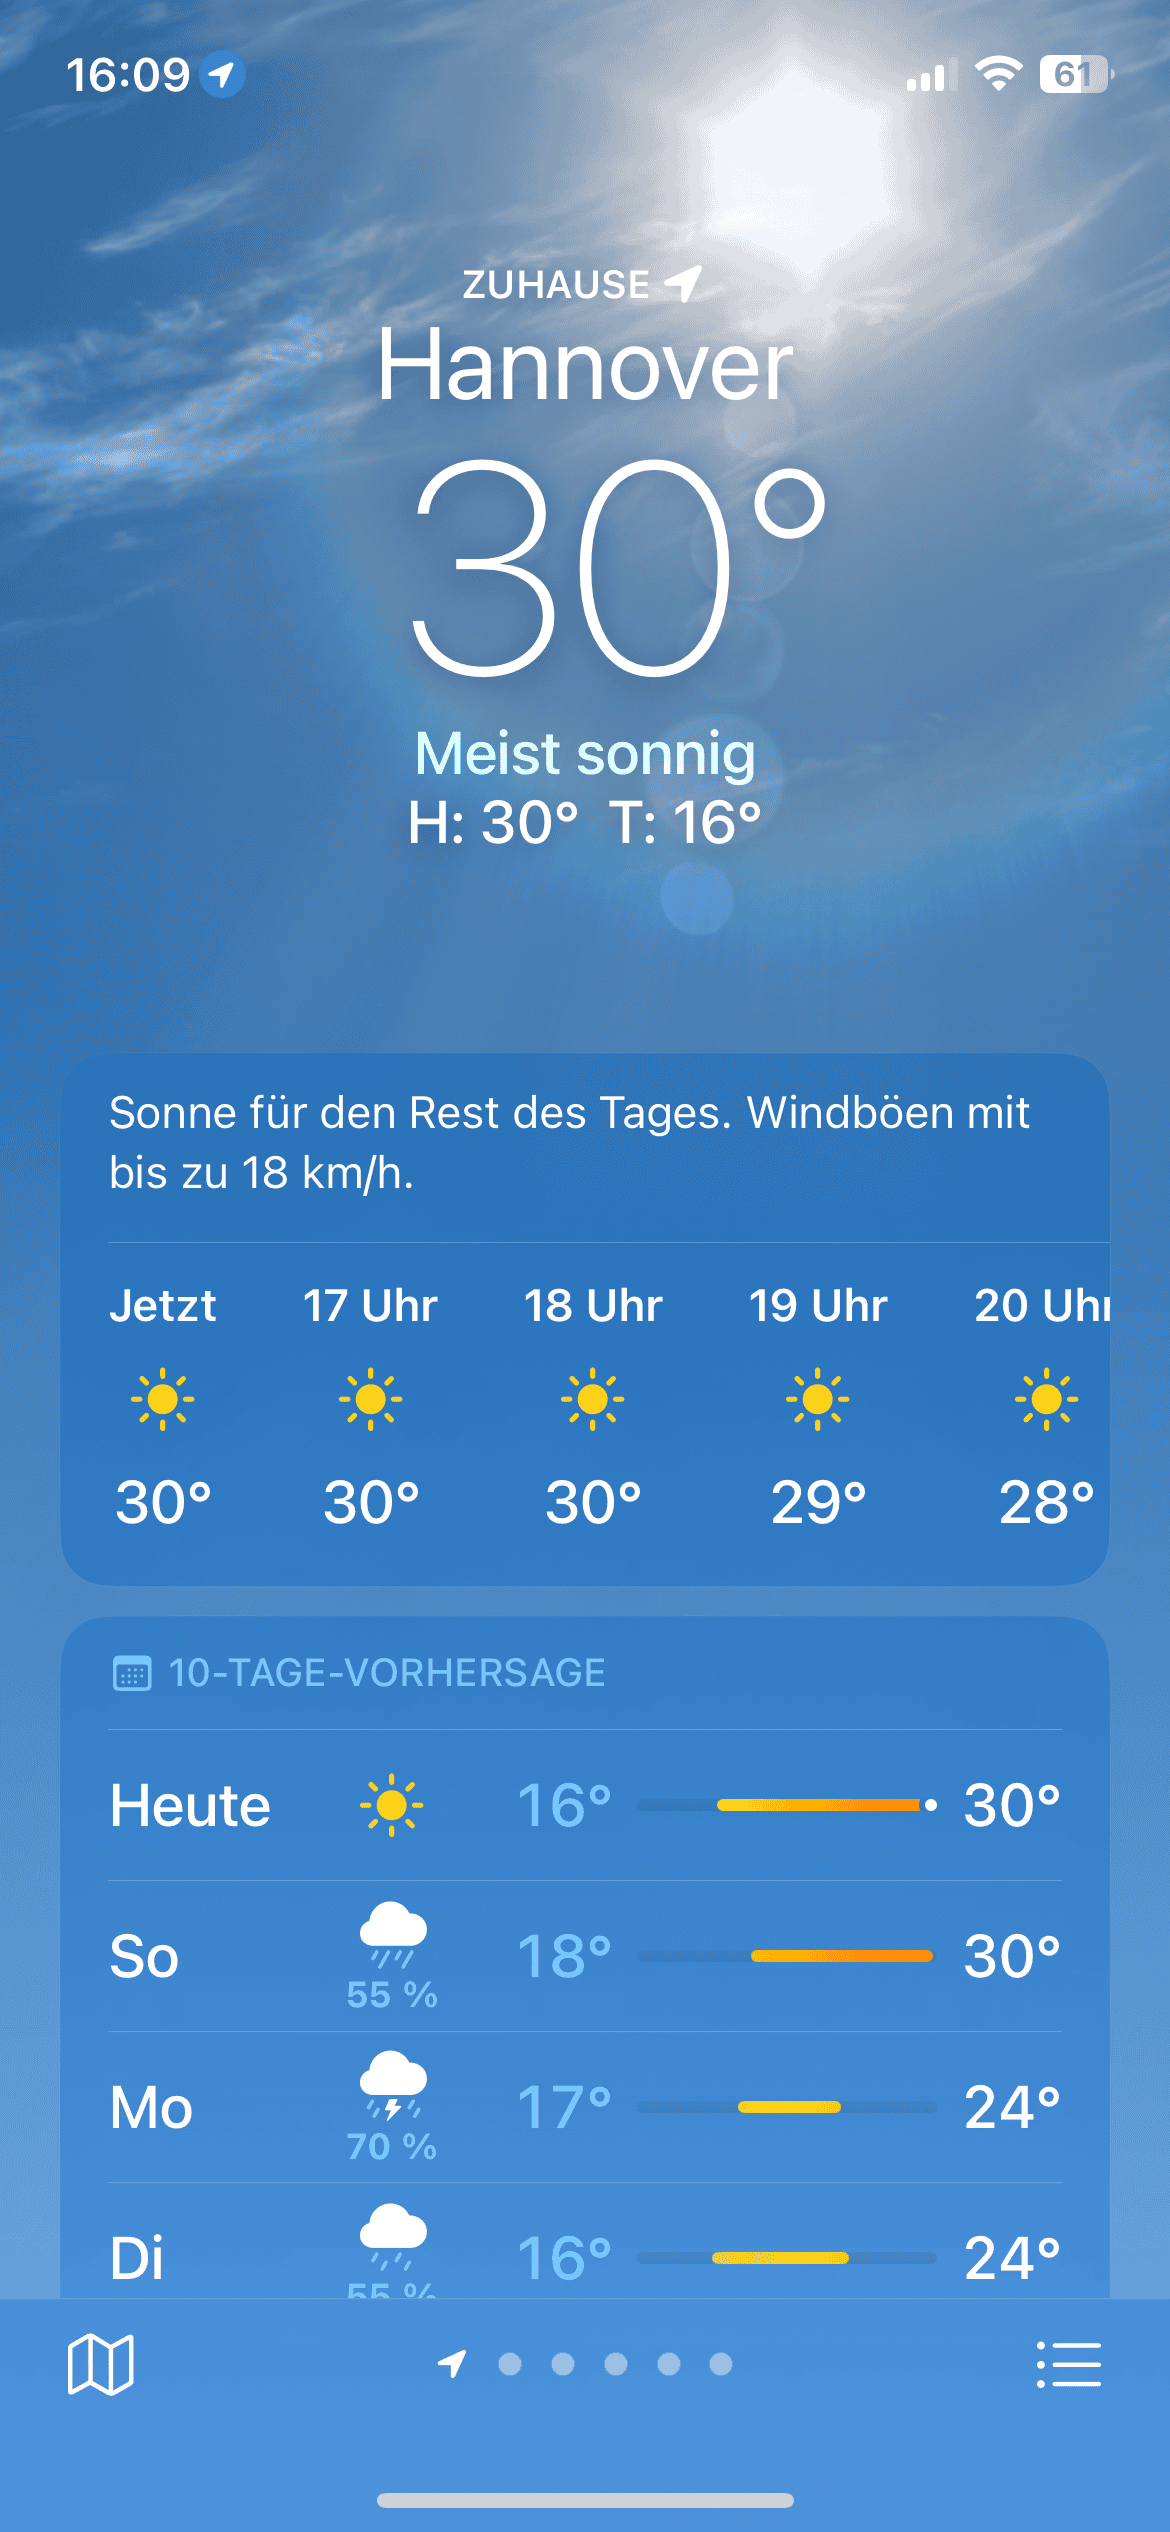 iOS Wetter App mit 30 Grad in Hannover.